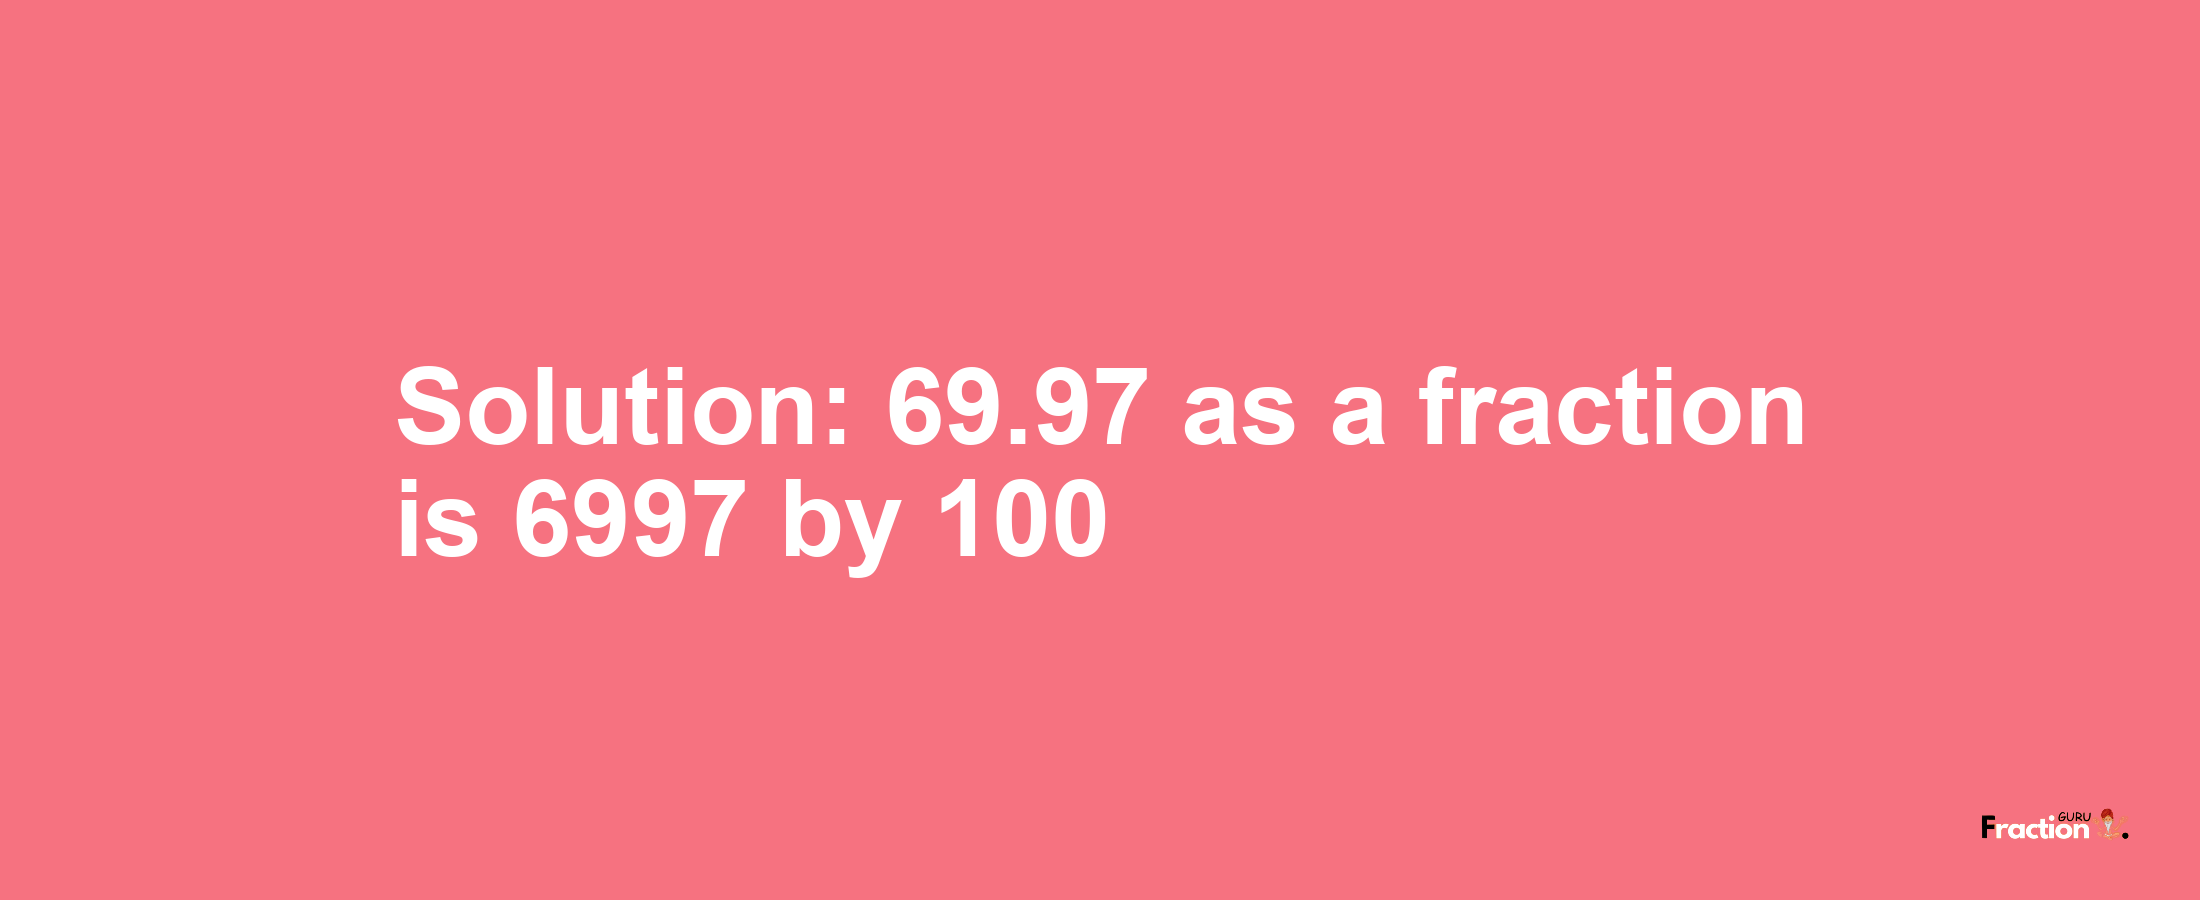 Solution:69.97 as a fraction is 6997/100